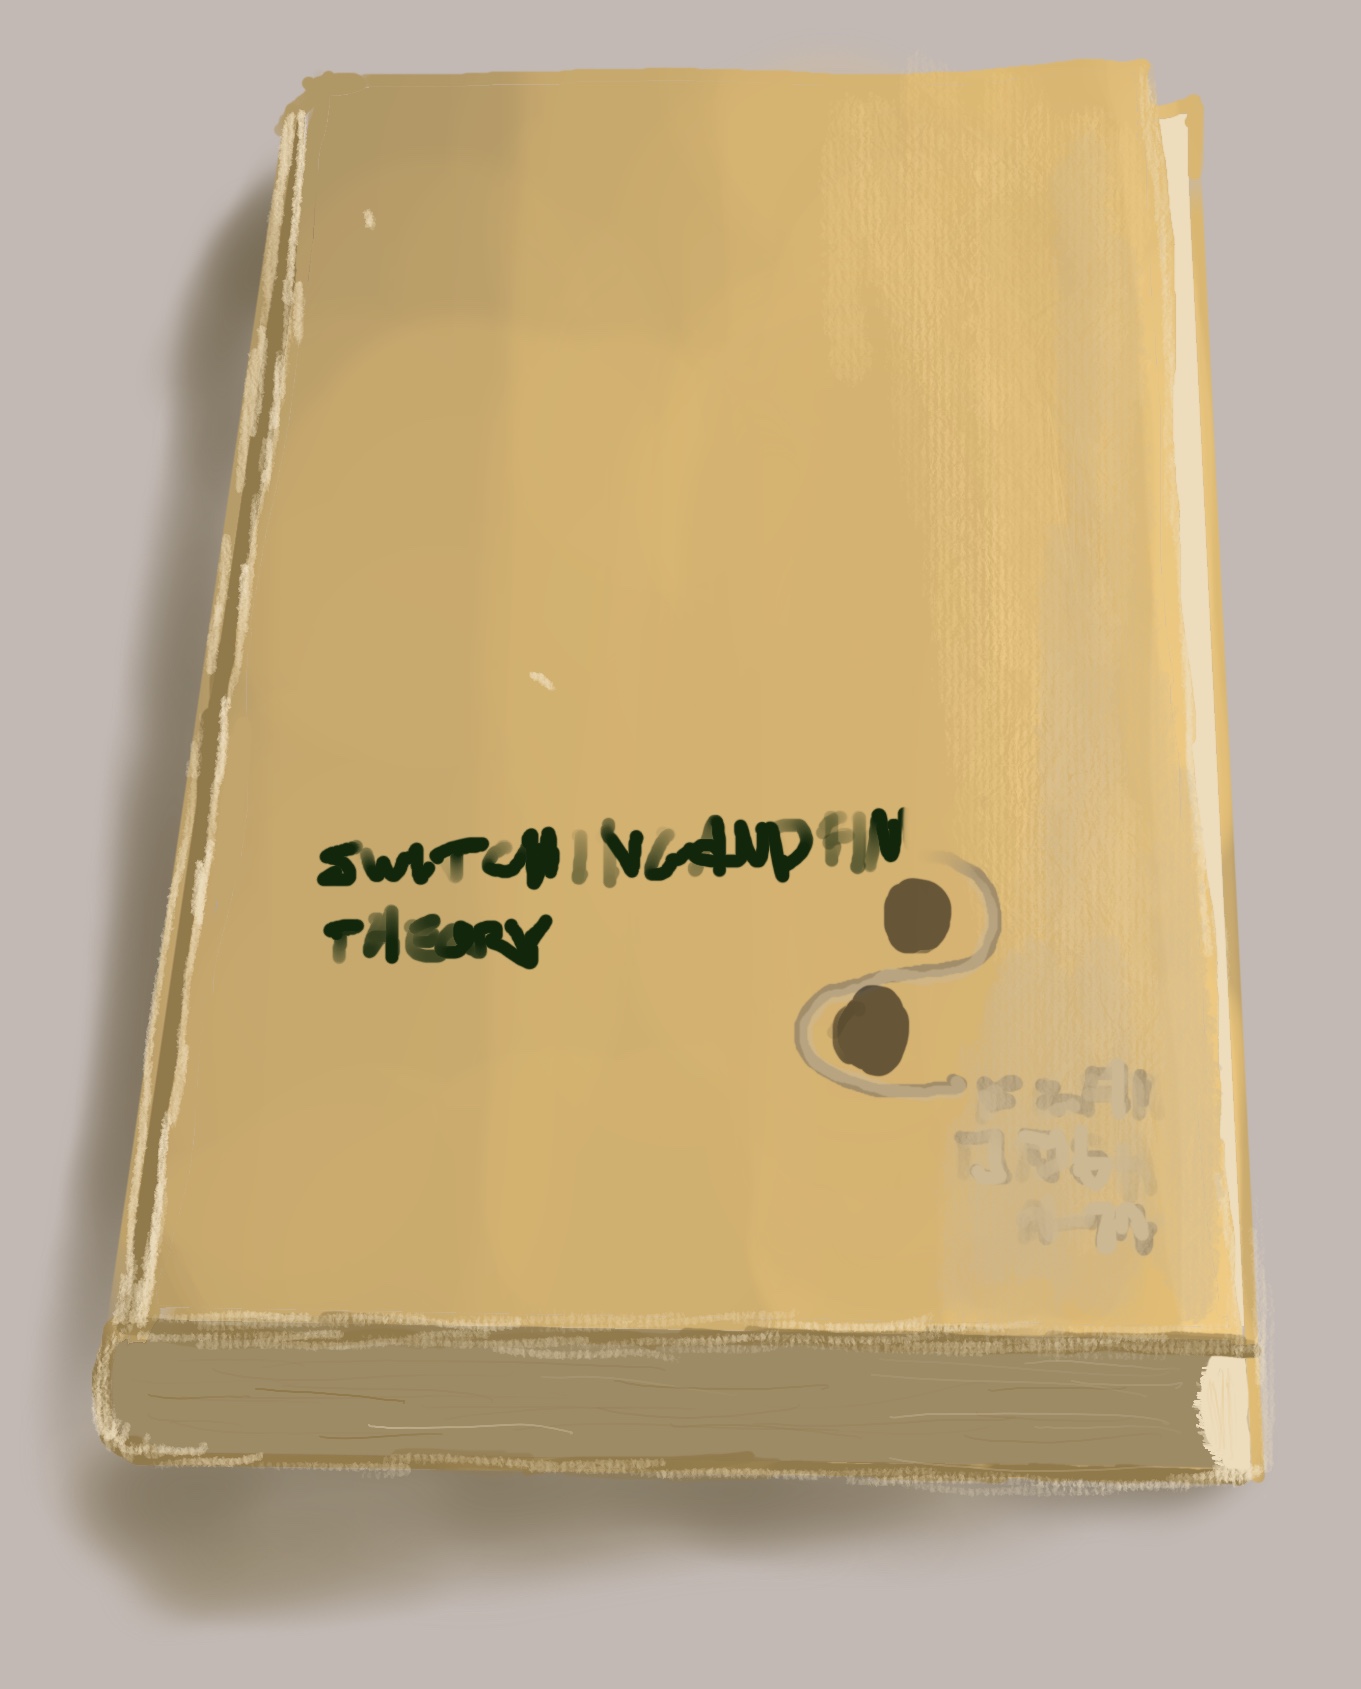 A yellow-brown book with sun falling to the side.